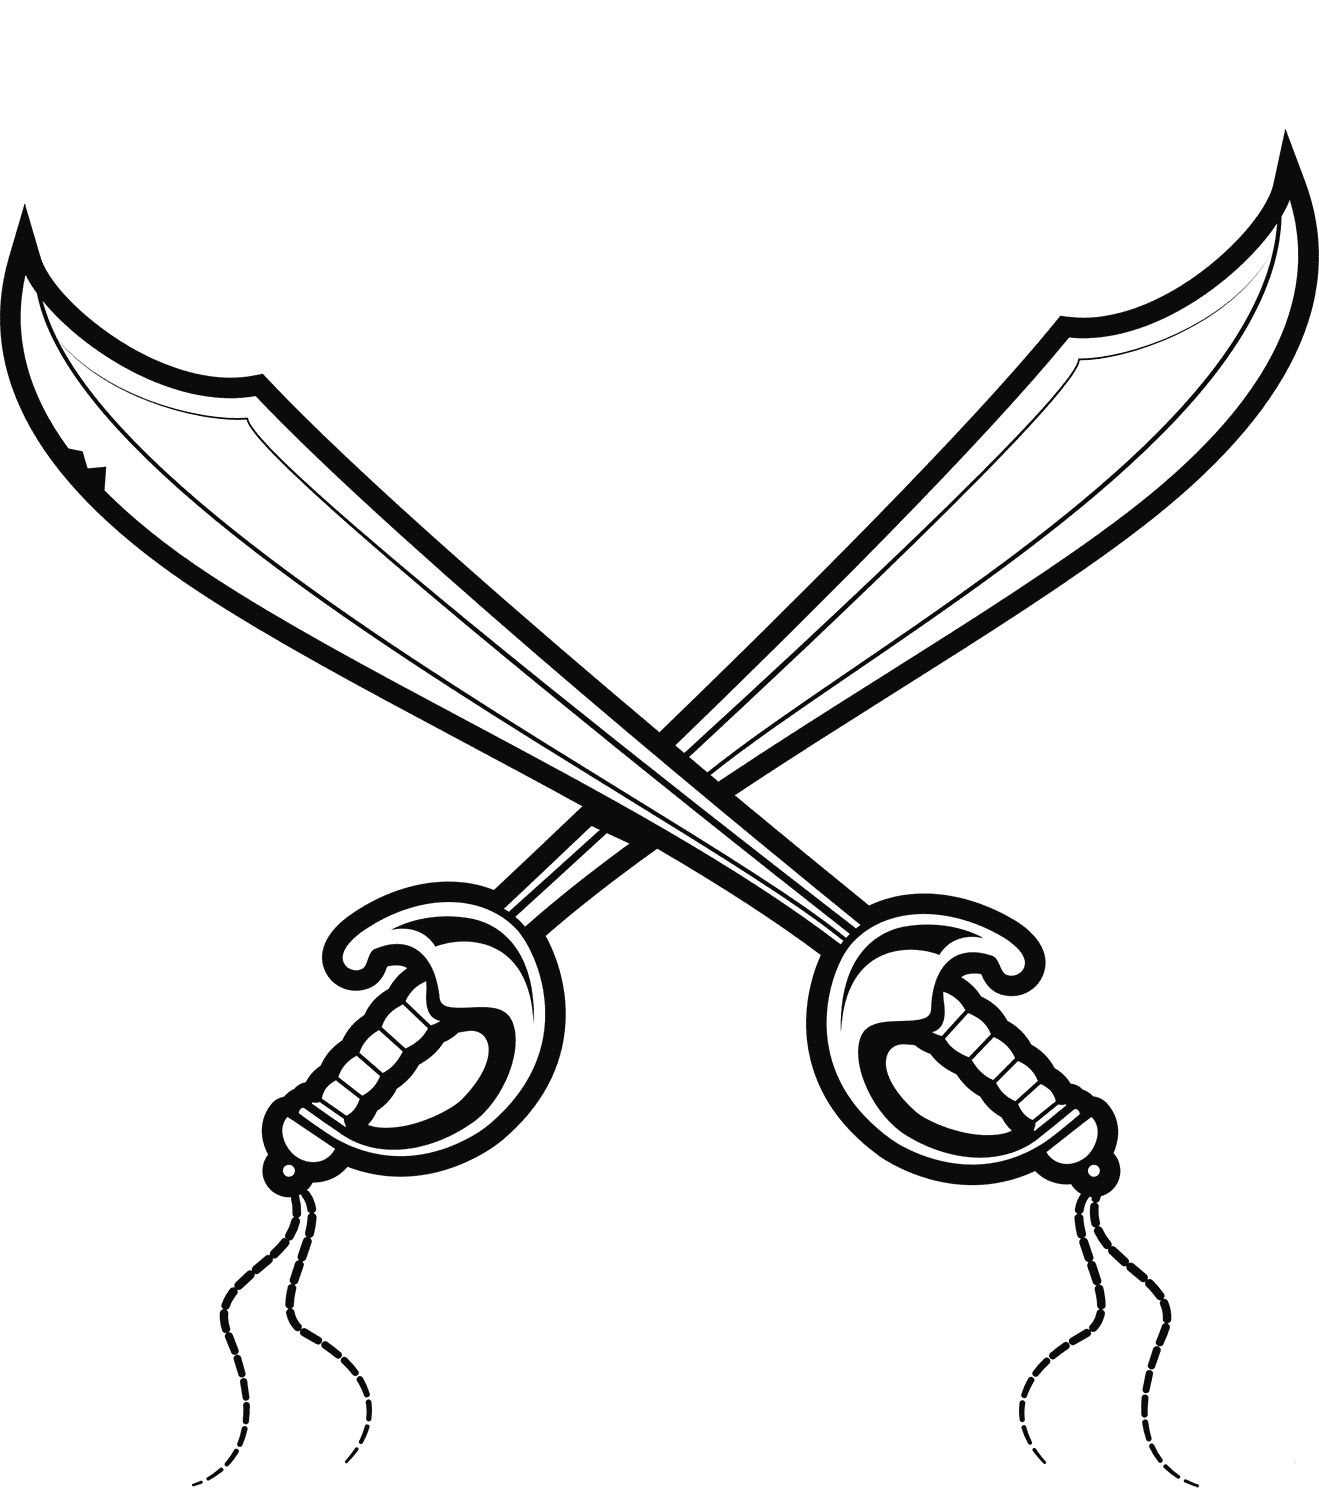 Pirate sword coloring page